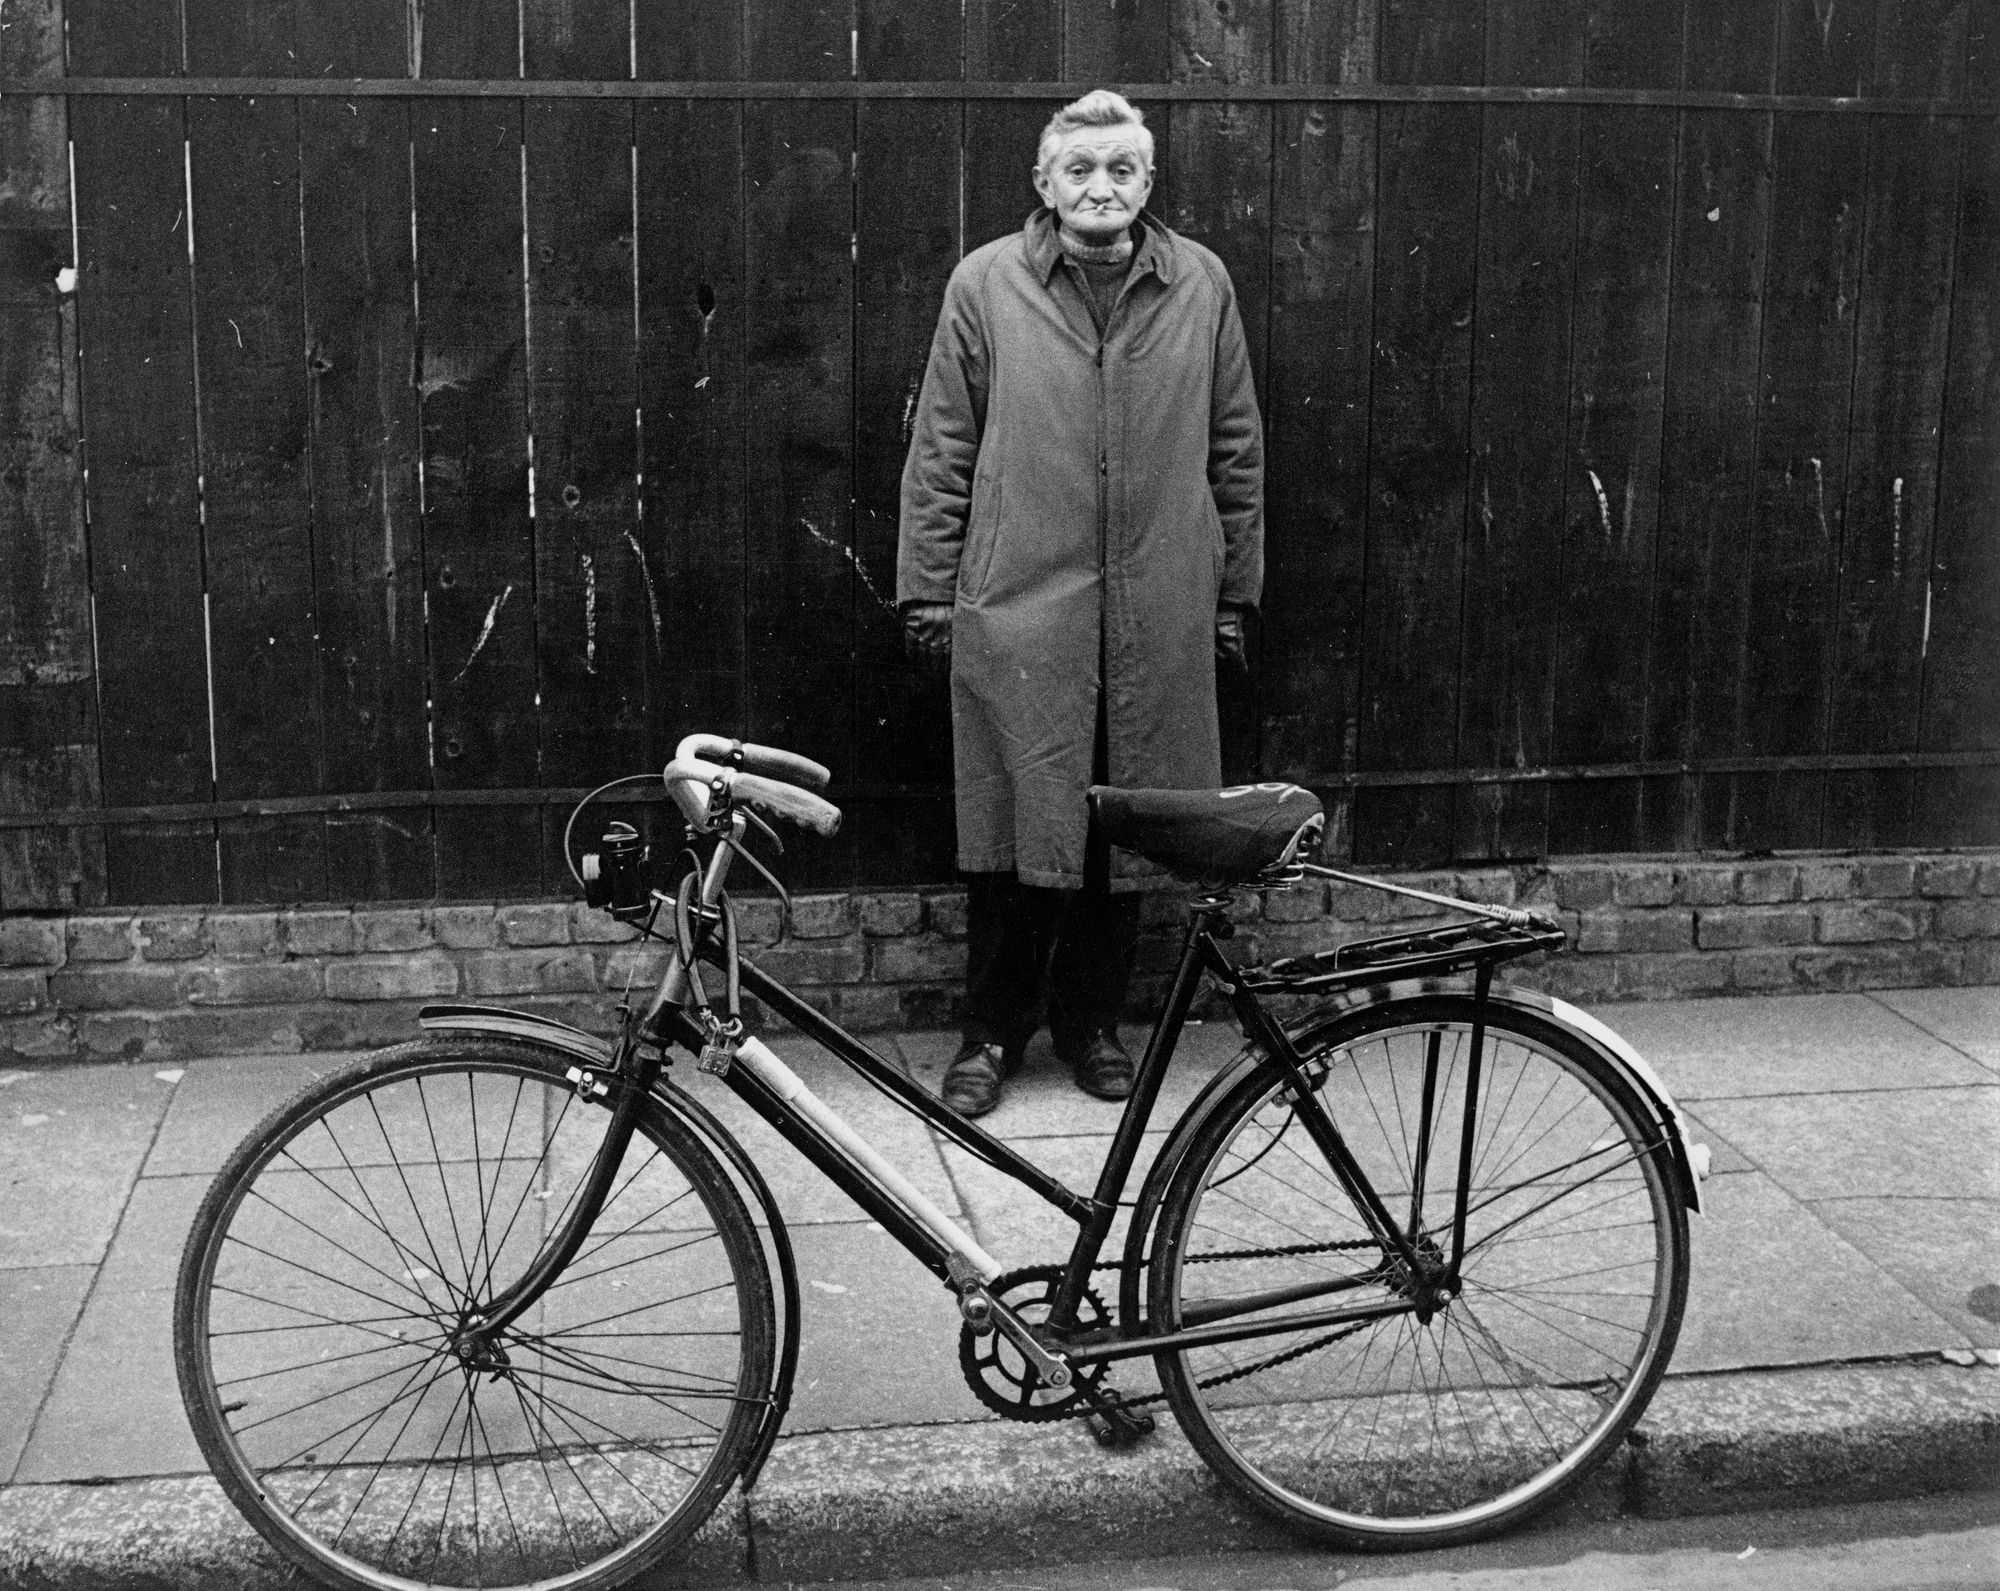 S_Old_Man_With_Bike